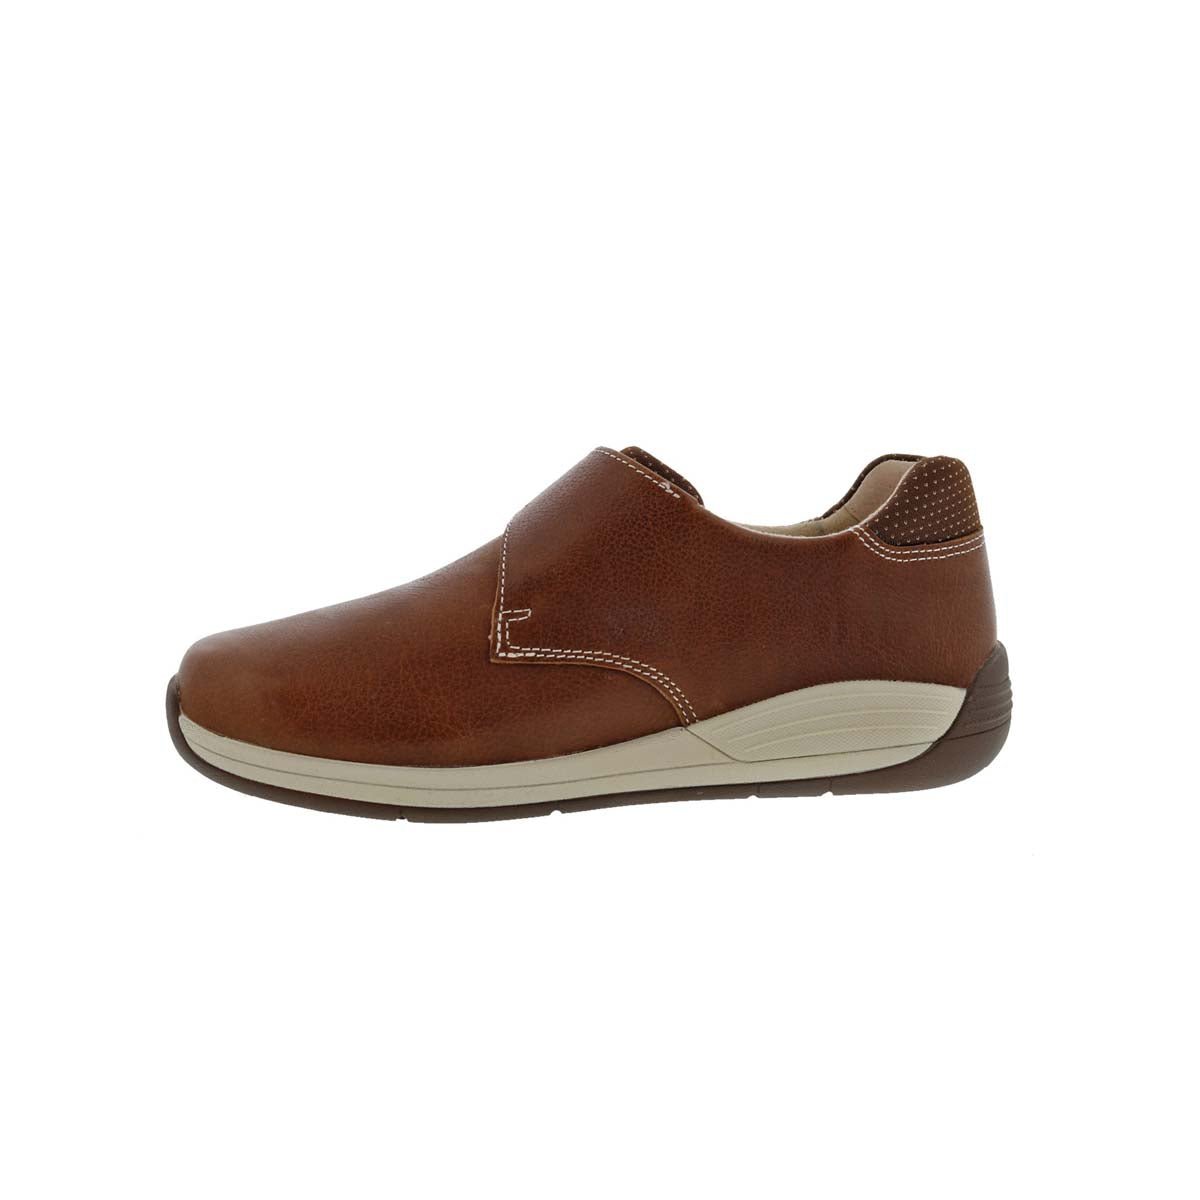 DREW TEMPO WOMEN ADJUSTABLE CLOSURE SLIP-ON SHOES IN CAMEL LEATHER - TLW Shoes